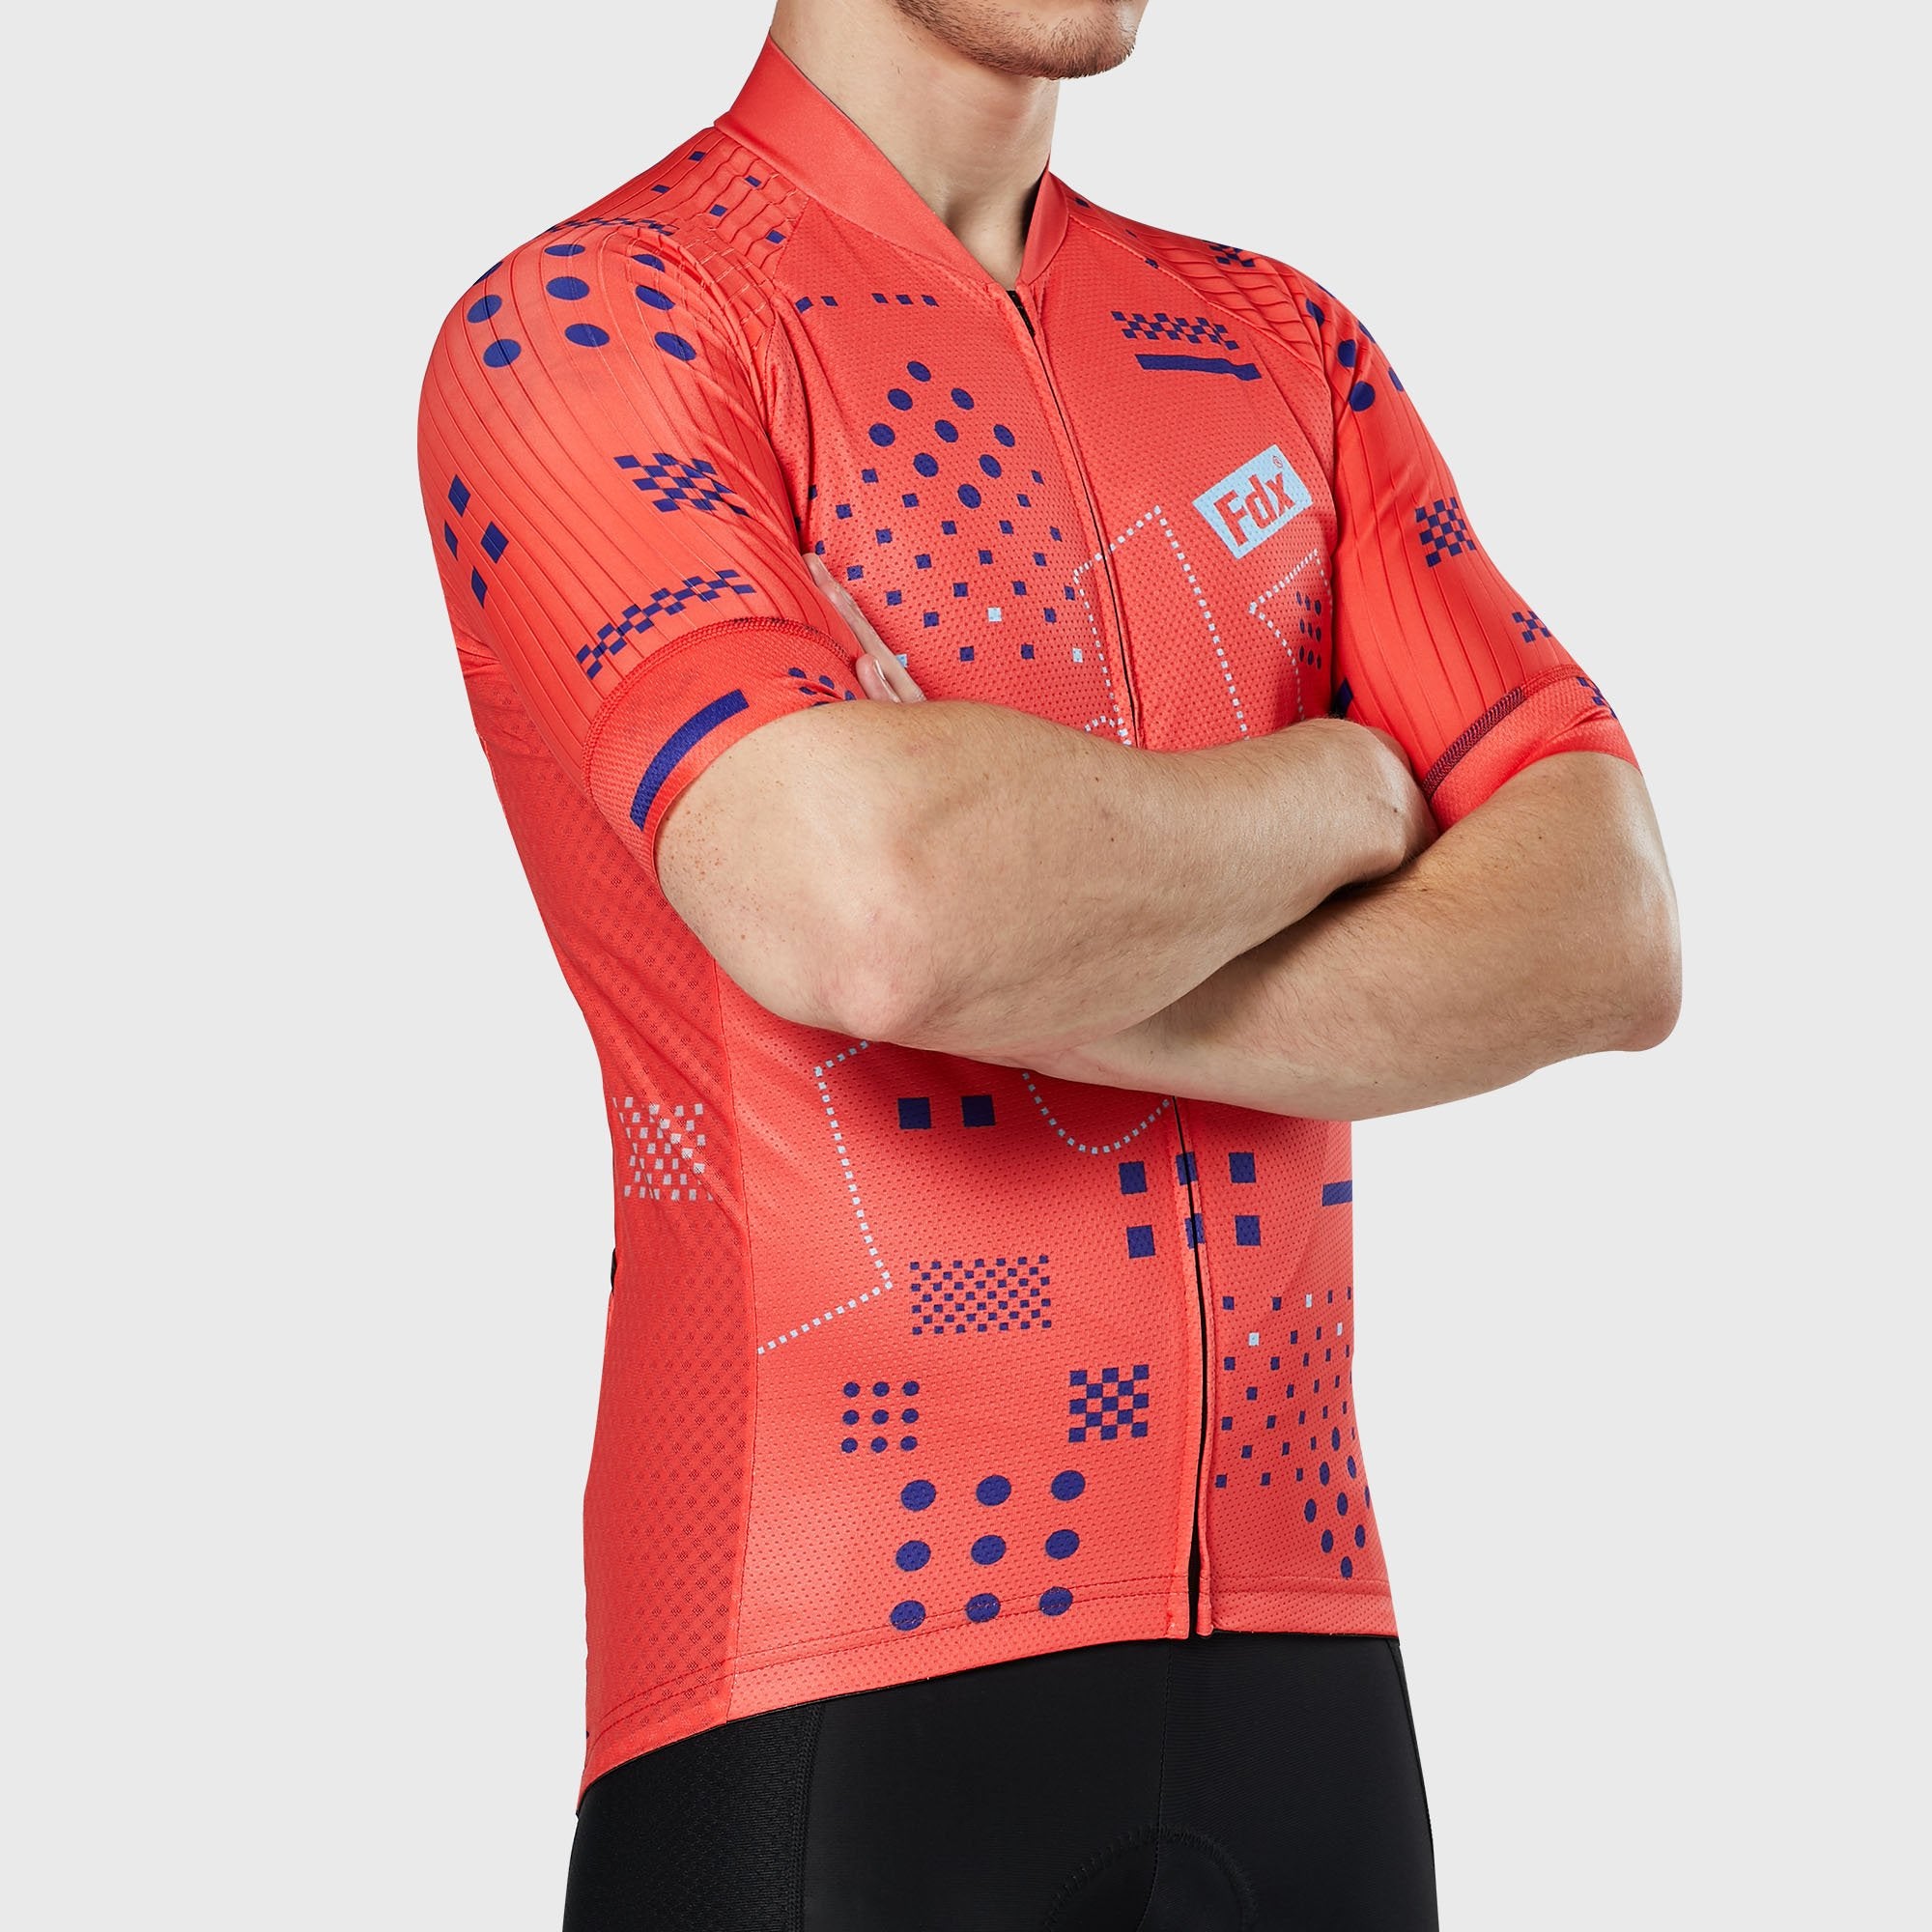 Fdx All Day Red Men's Short Sleeve Summer Cycling Jersey